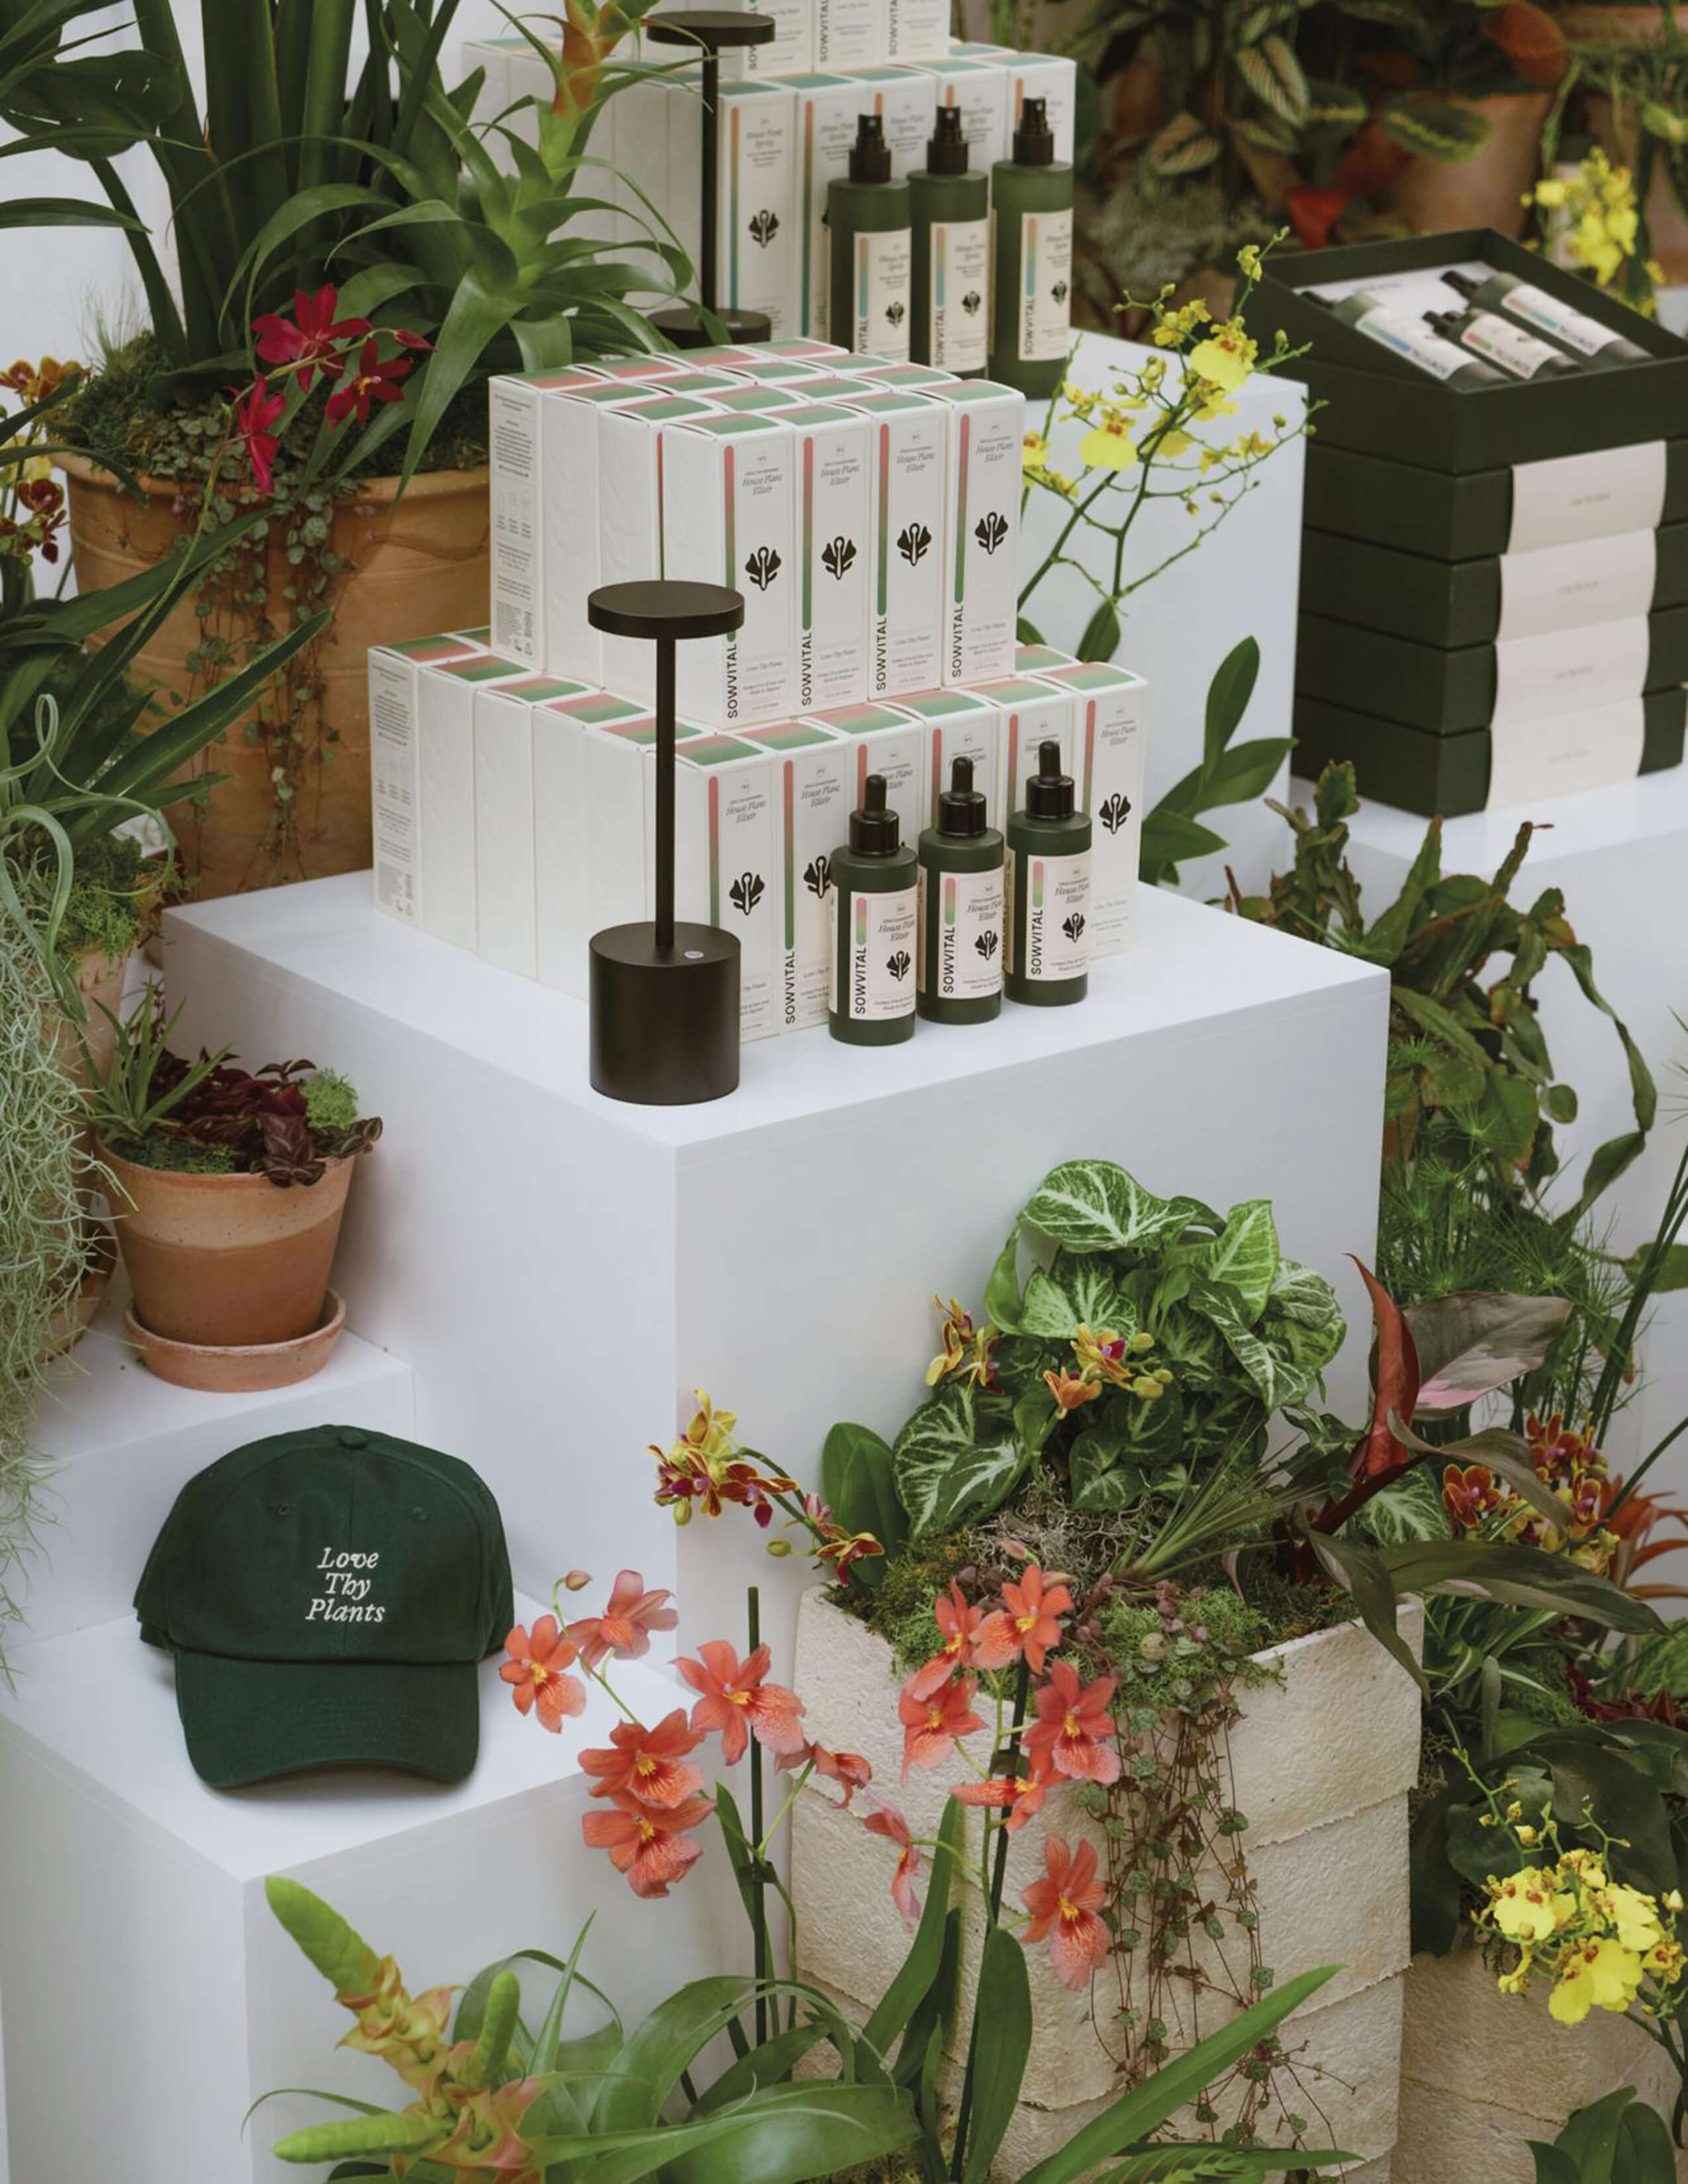 The Sowvital house plant products are displayed and organised while being surrounded by different kinds of plants and orchids.